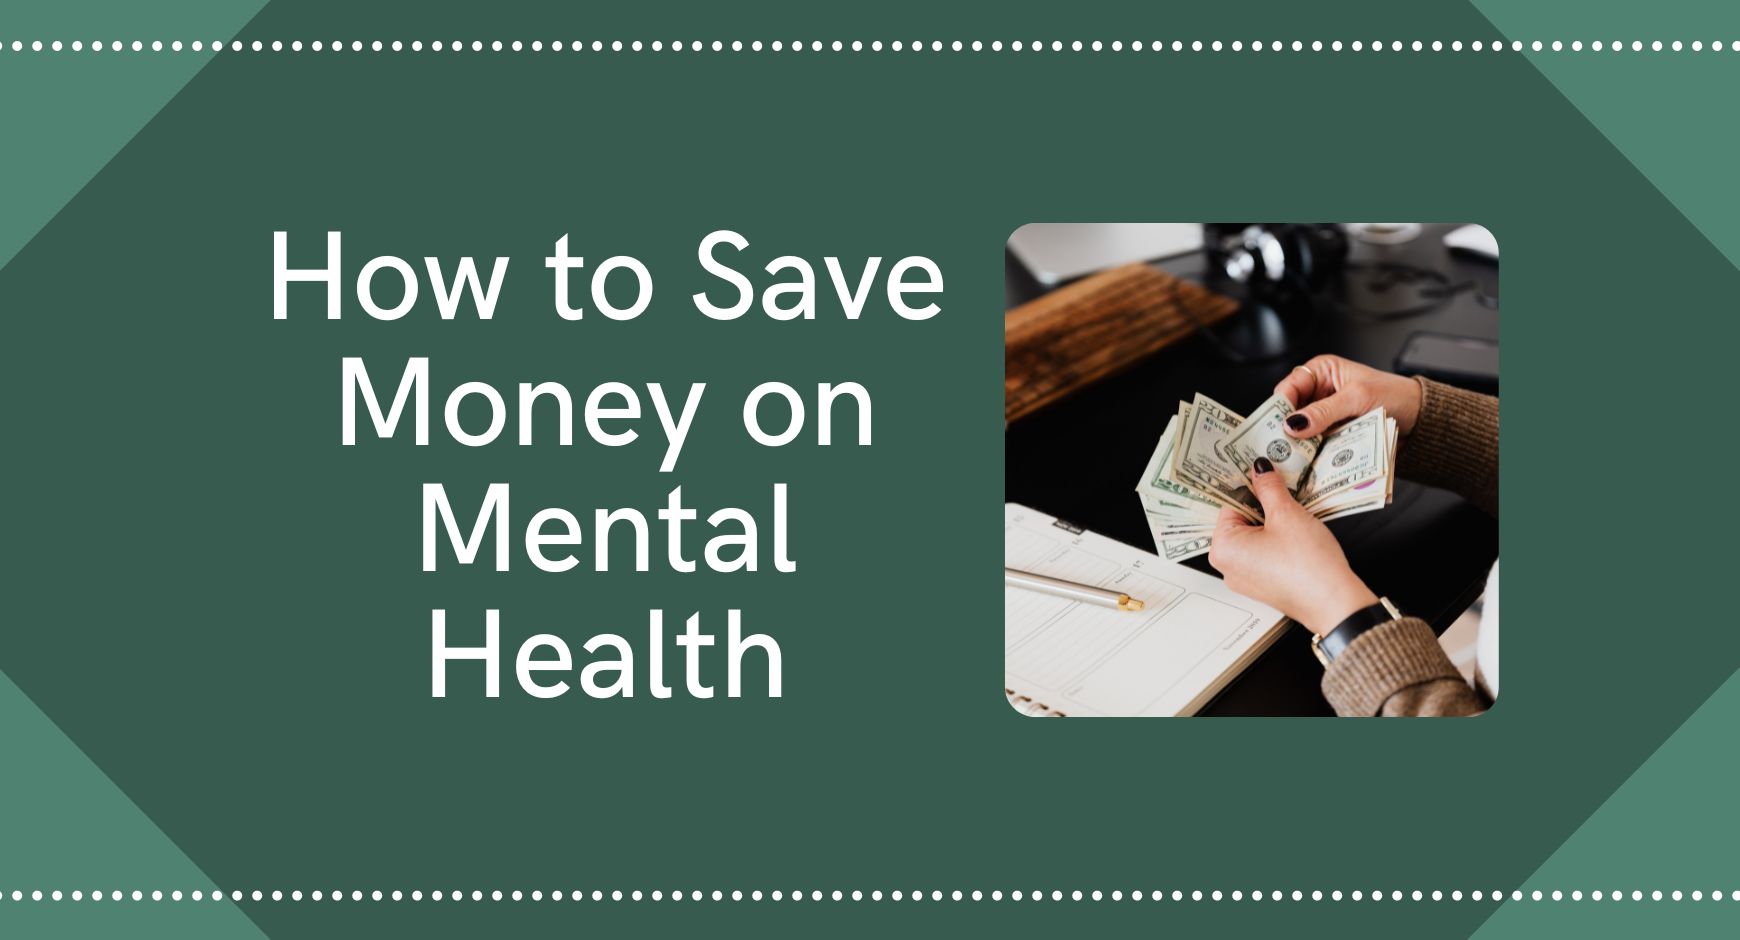 Hands counting a wad of cash above a green background next to the words "How to Save Money on Mental Health"